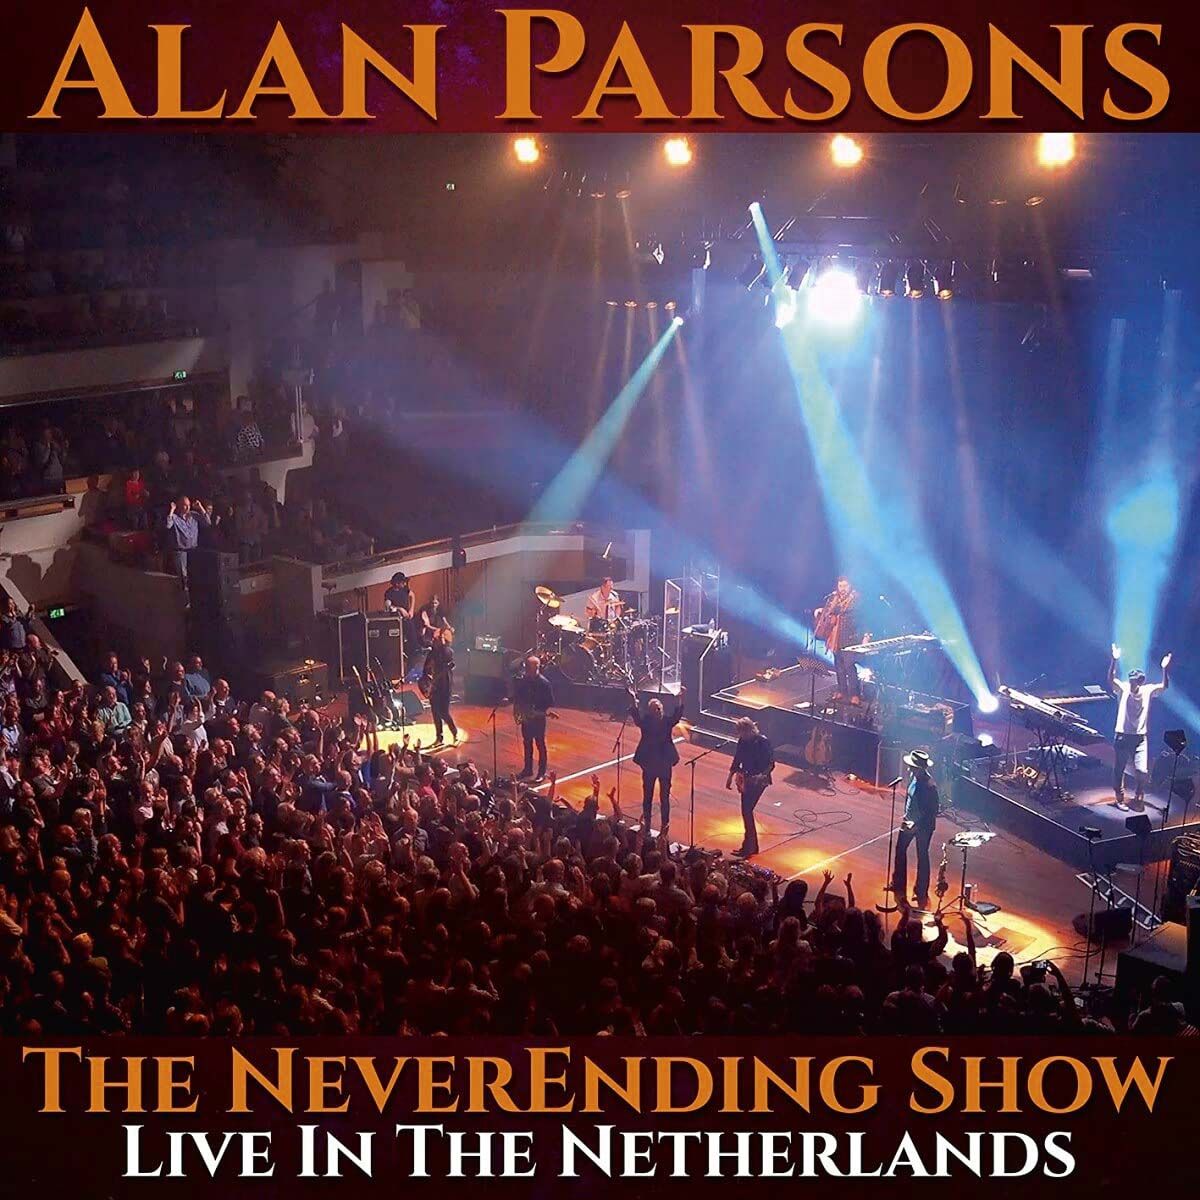 Alan Parsons - The Neverending Show – Live in Netherlands